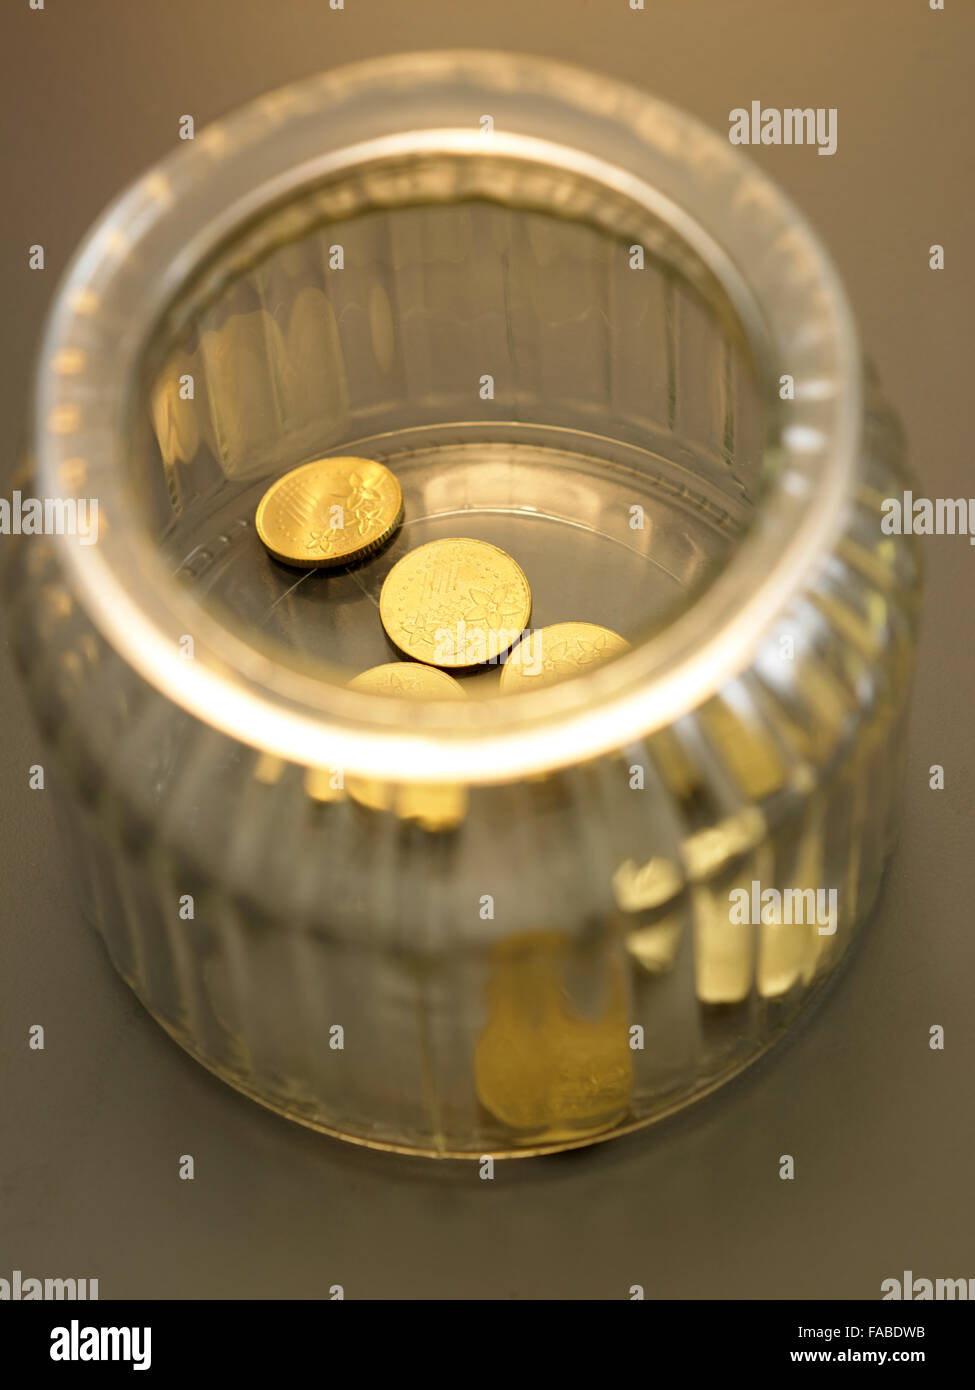 few pieces of coin in the saving jar Stock Photo